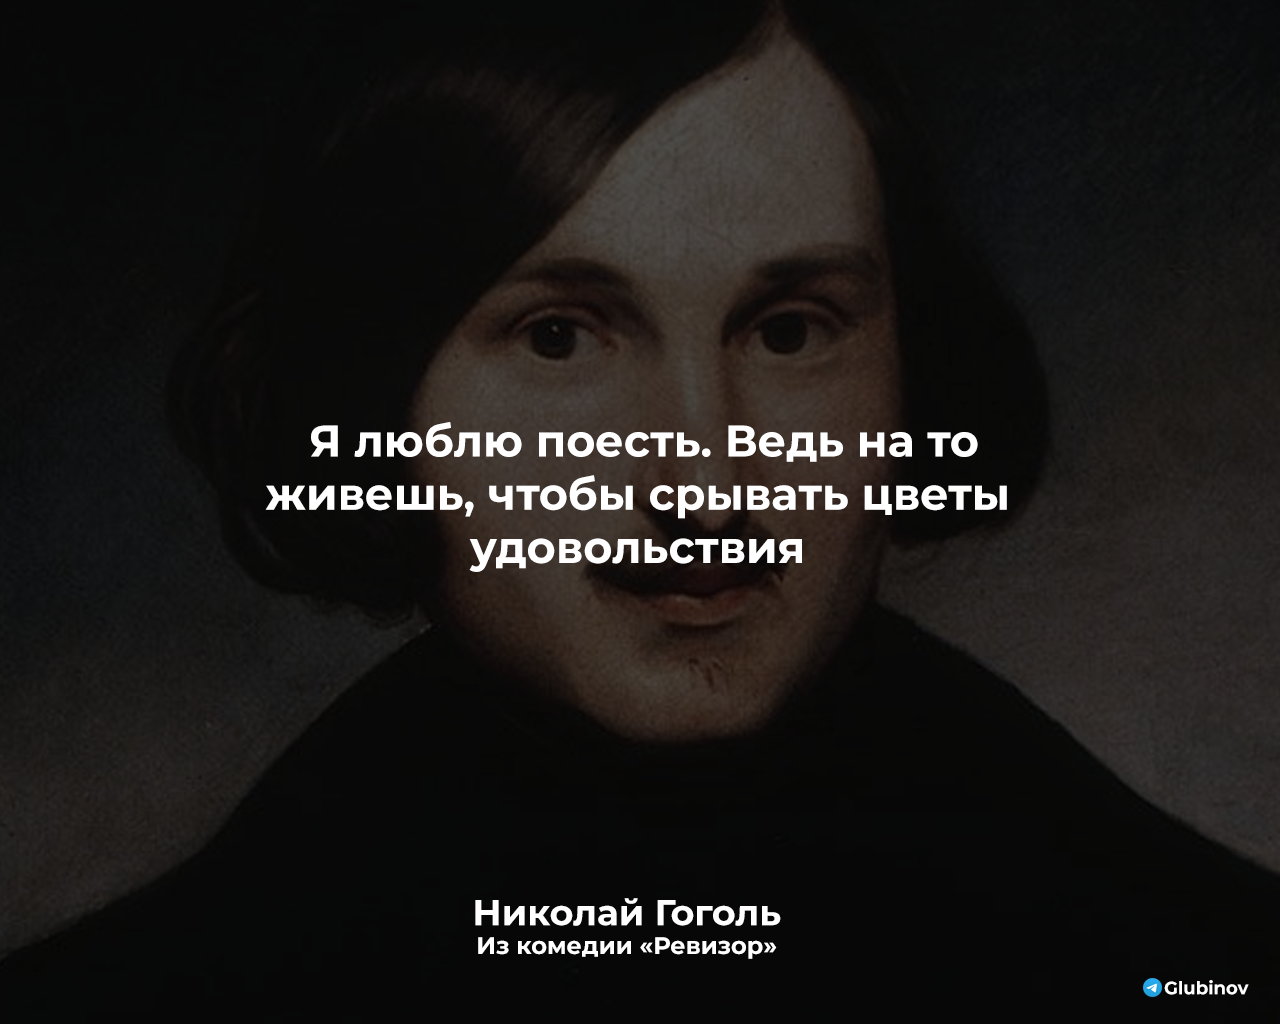 Food - Quotes, Literature, A life, Picture with text, Nikolay Gogol